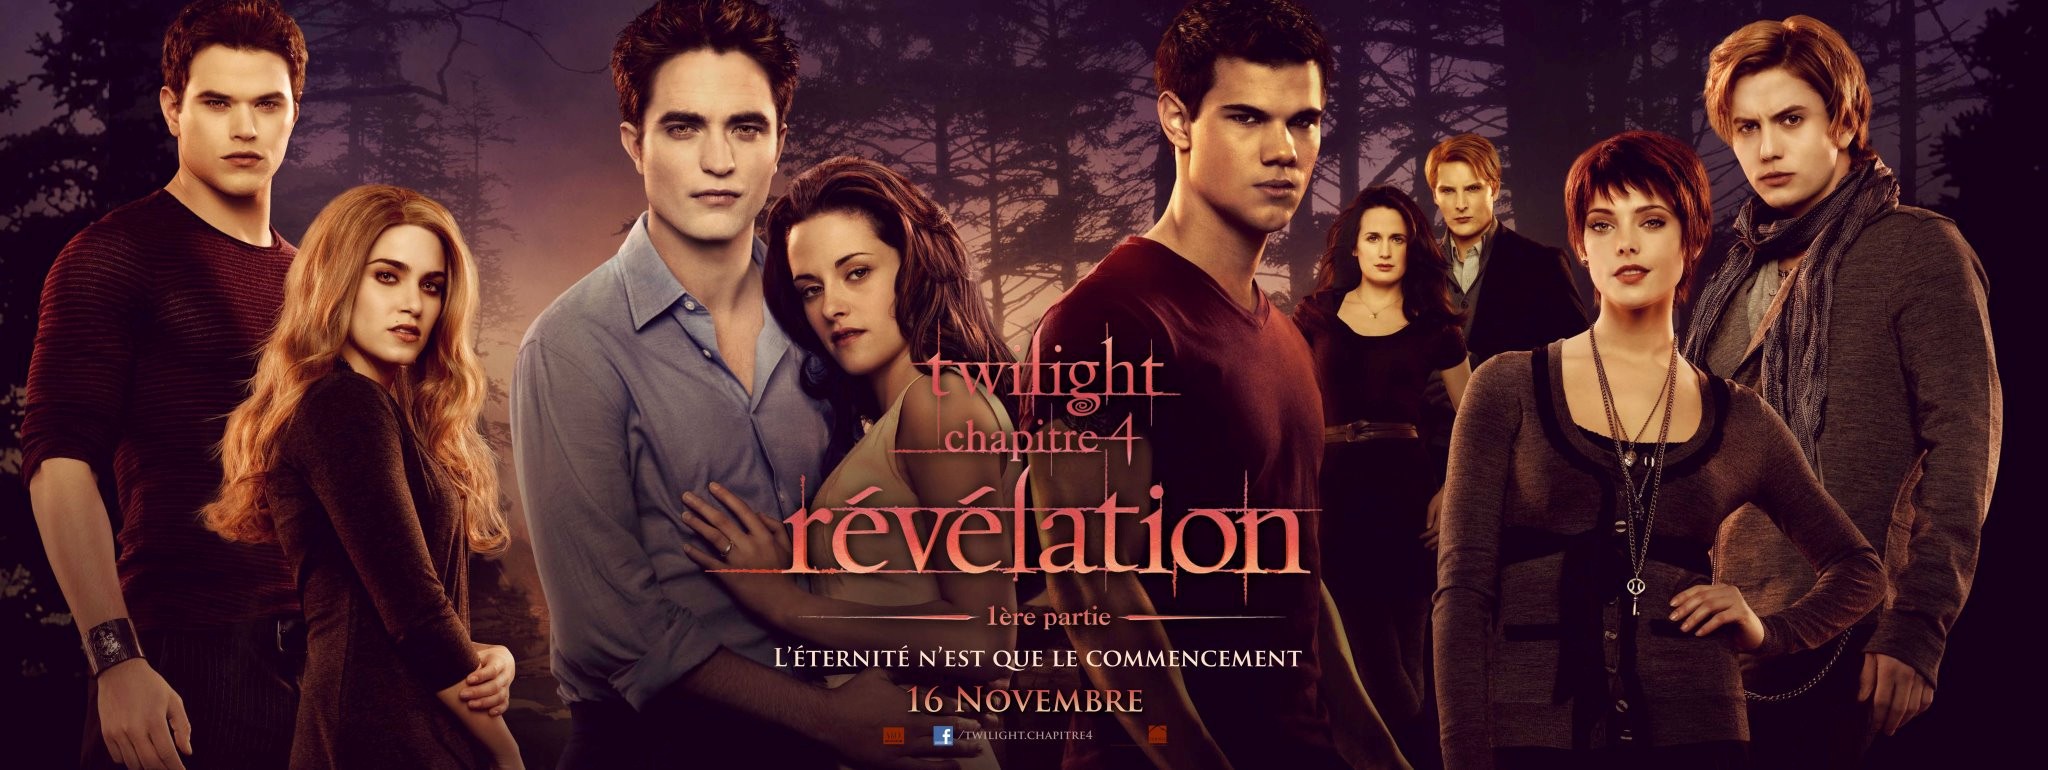 The Twilight Saga: Breaking Dawn, Part 2 download the new version